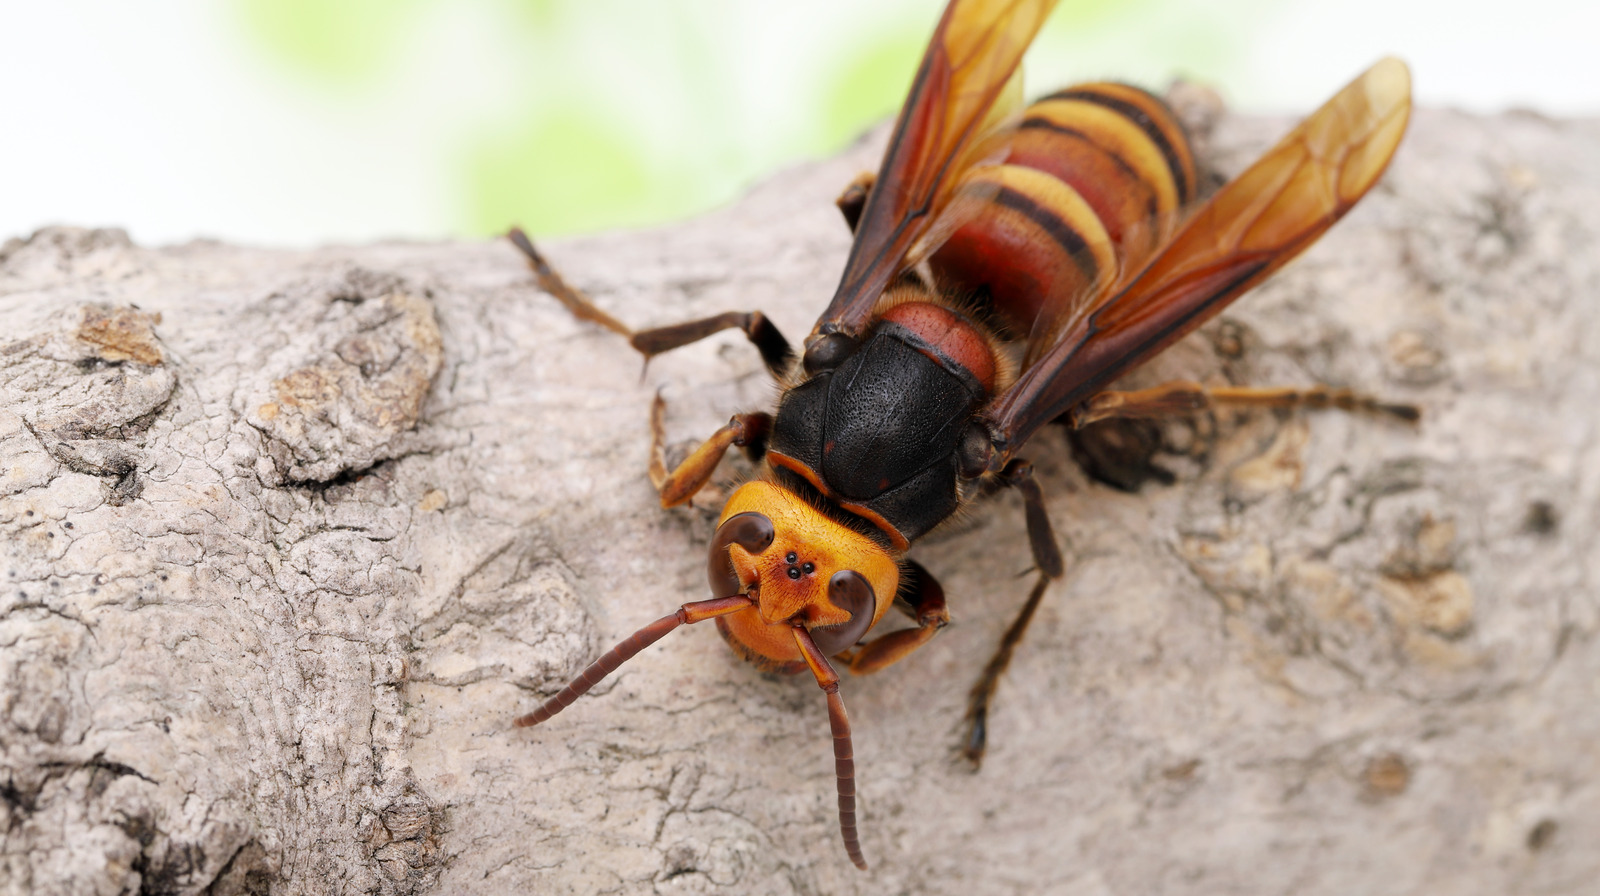 Does vinegar kill wasps Pest control experts weigh in